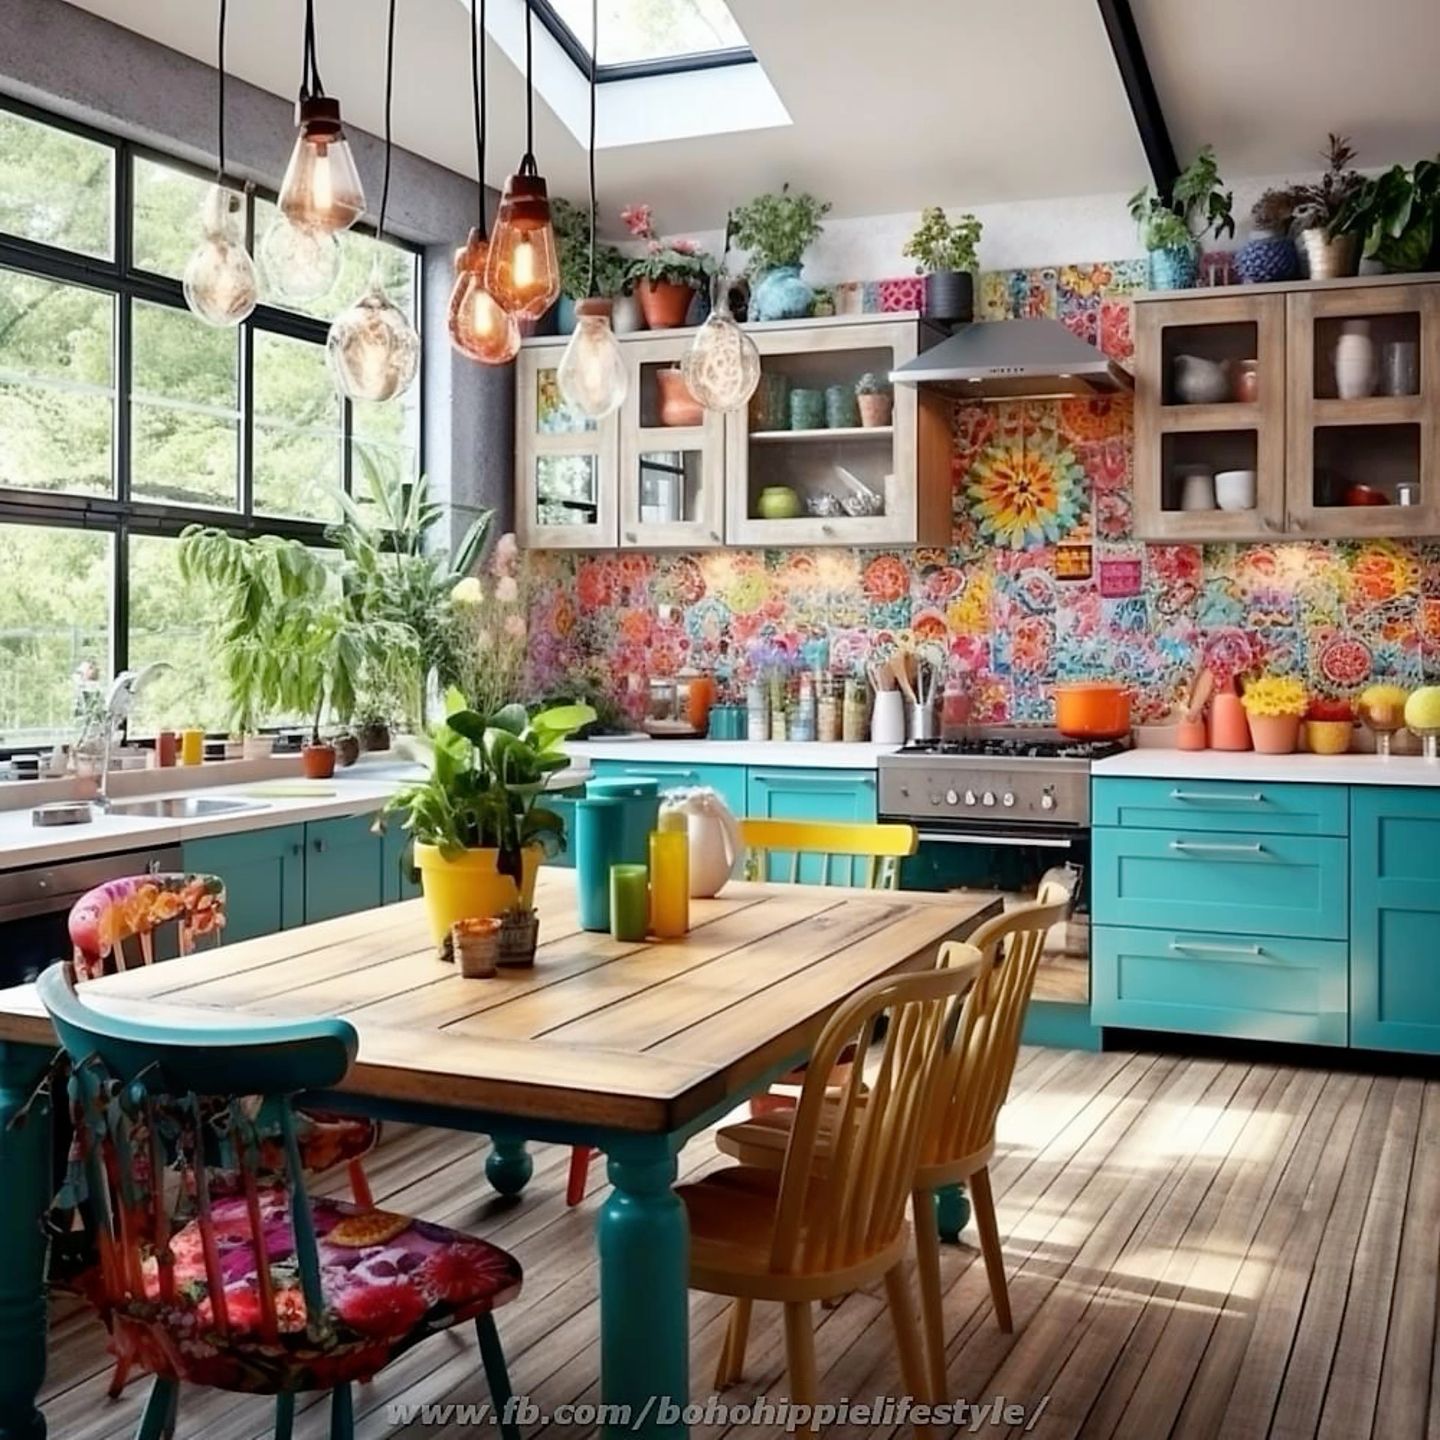 Bringing Life to Your Space: Colorful Kitchen Ideas for a Vibrant Home